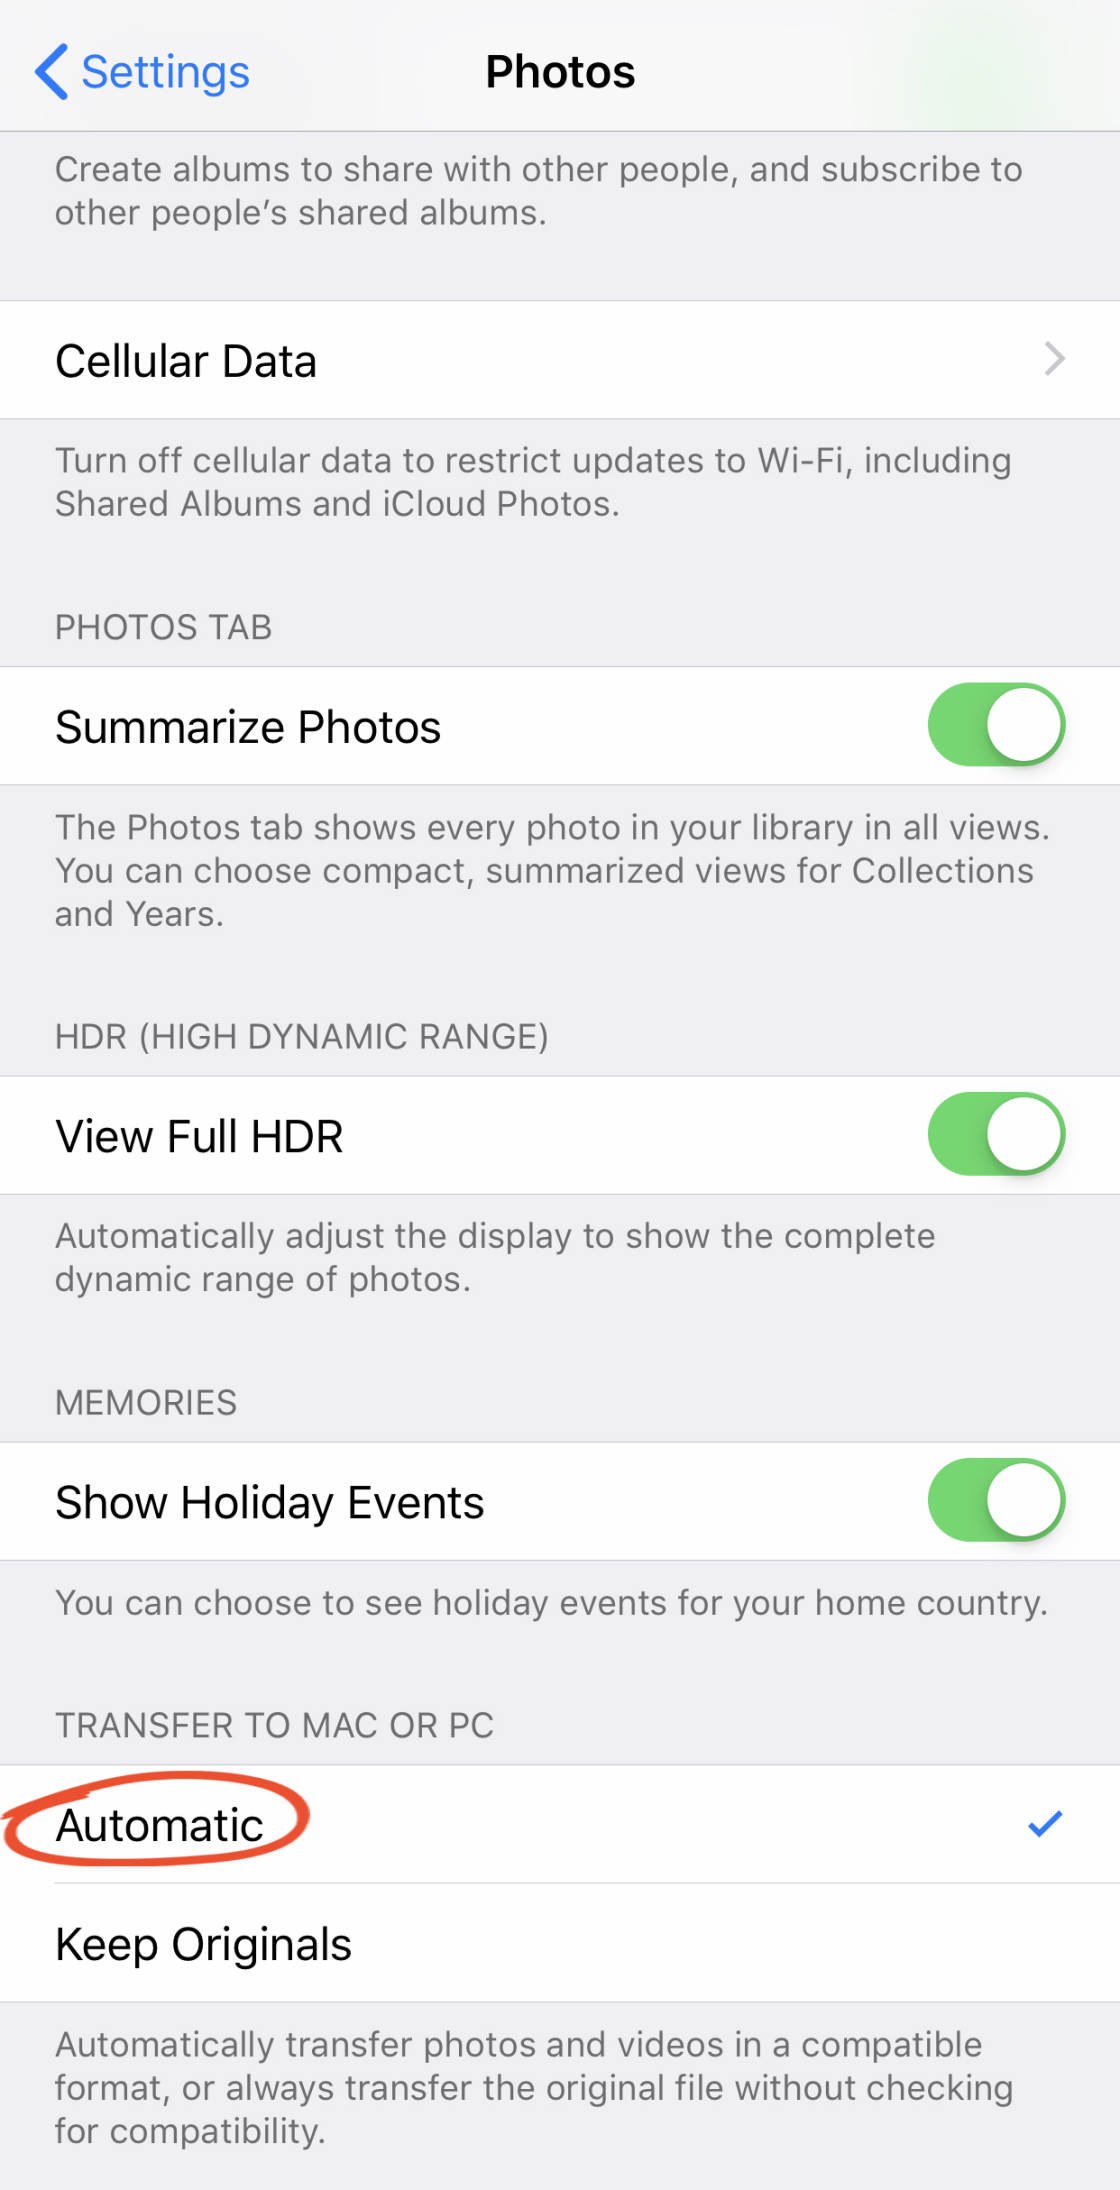 How To Transference Photos From iPhone To PC no script